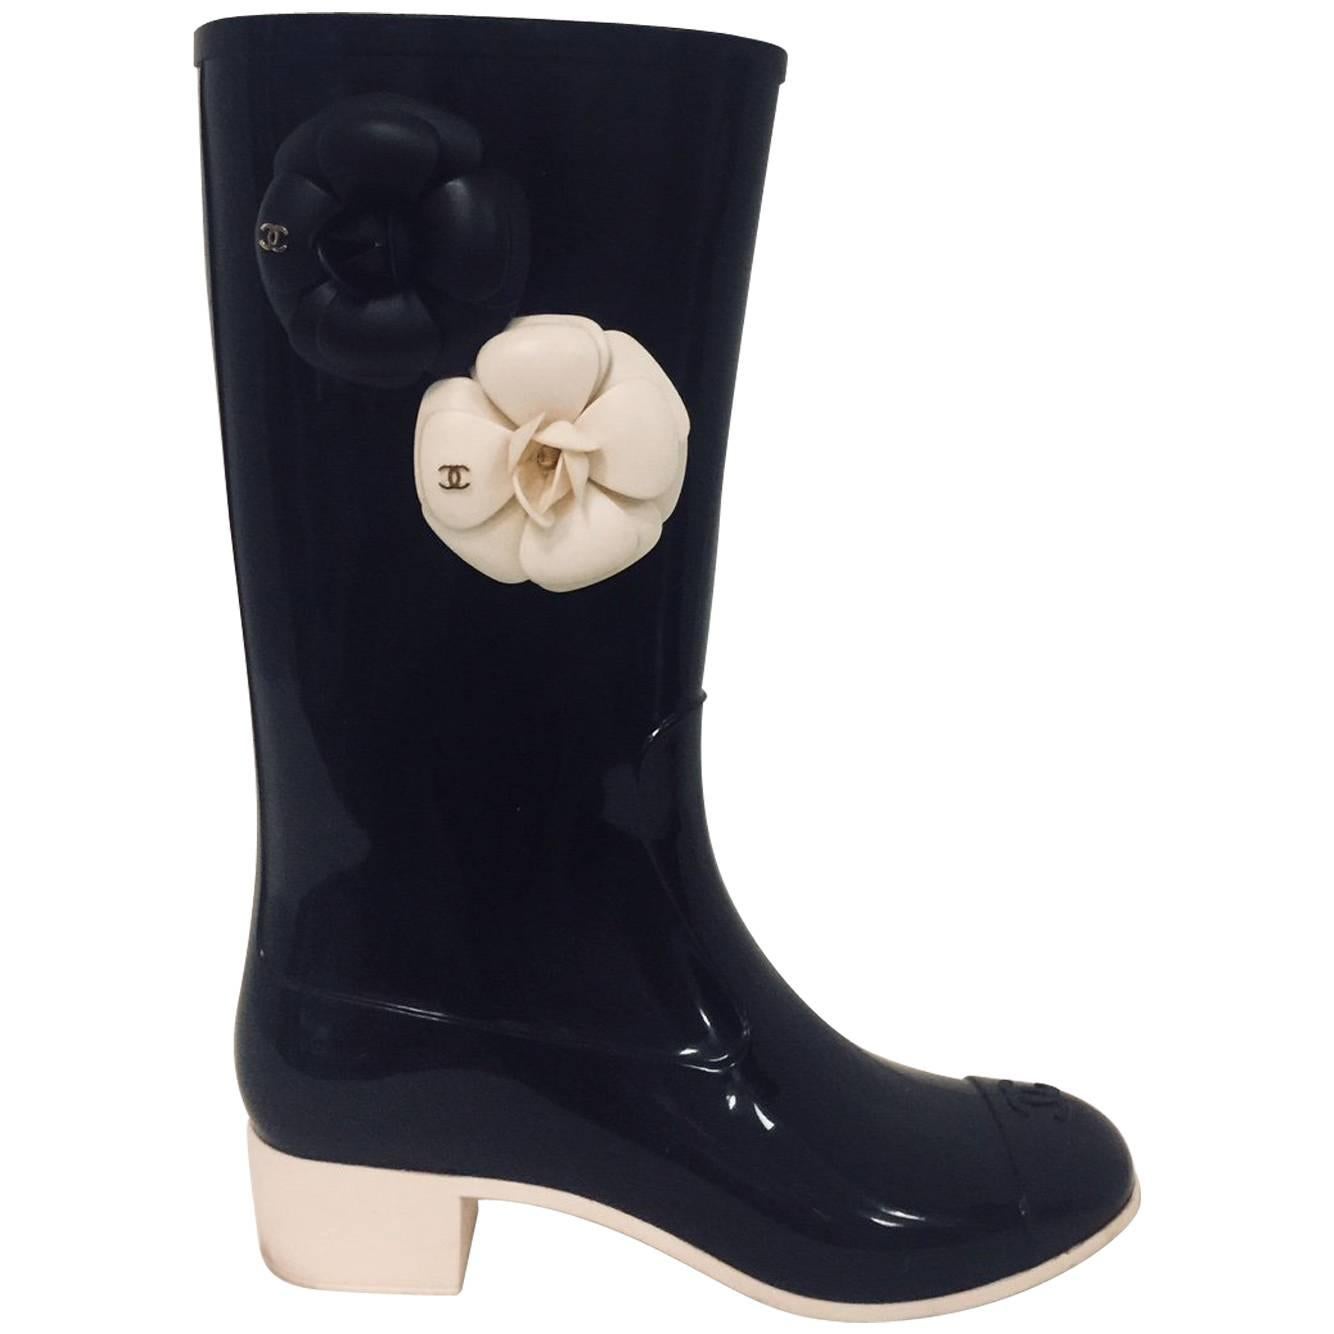 Coveted Chanel Black Cap Toe Wellington Boots with Two Camellia Shaft